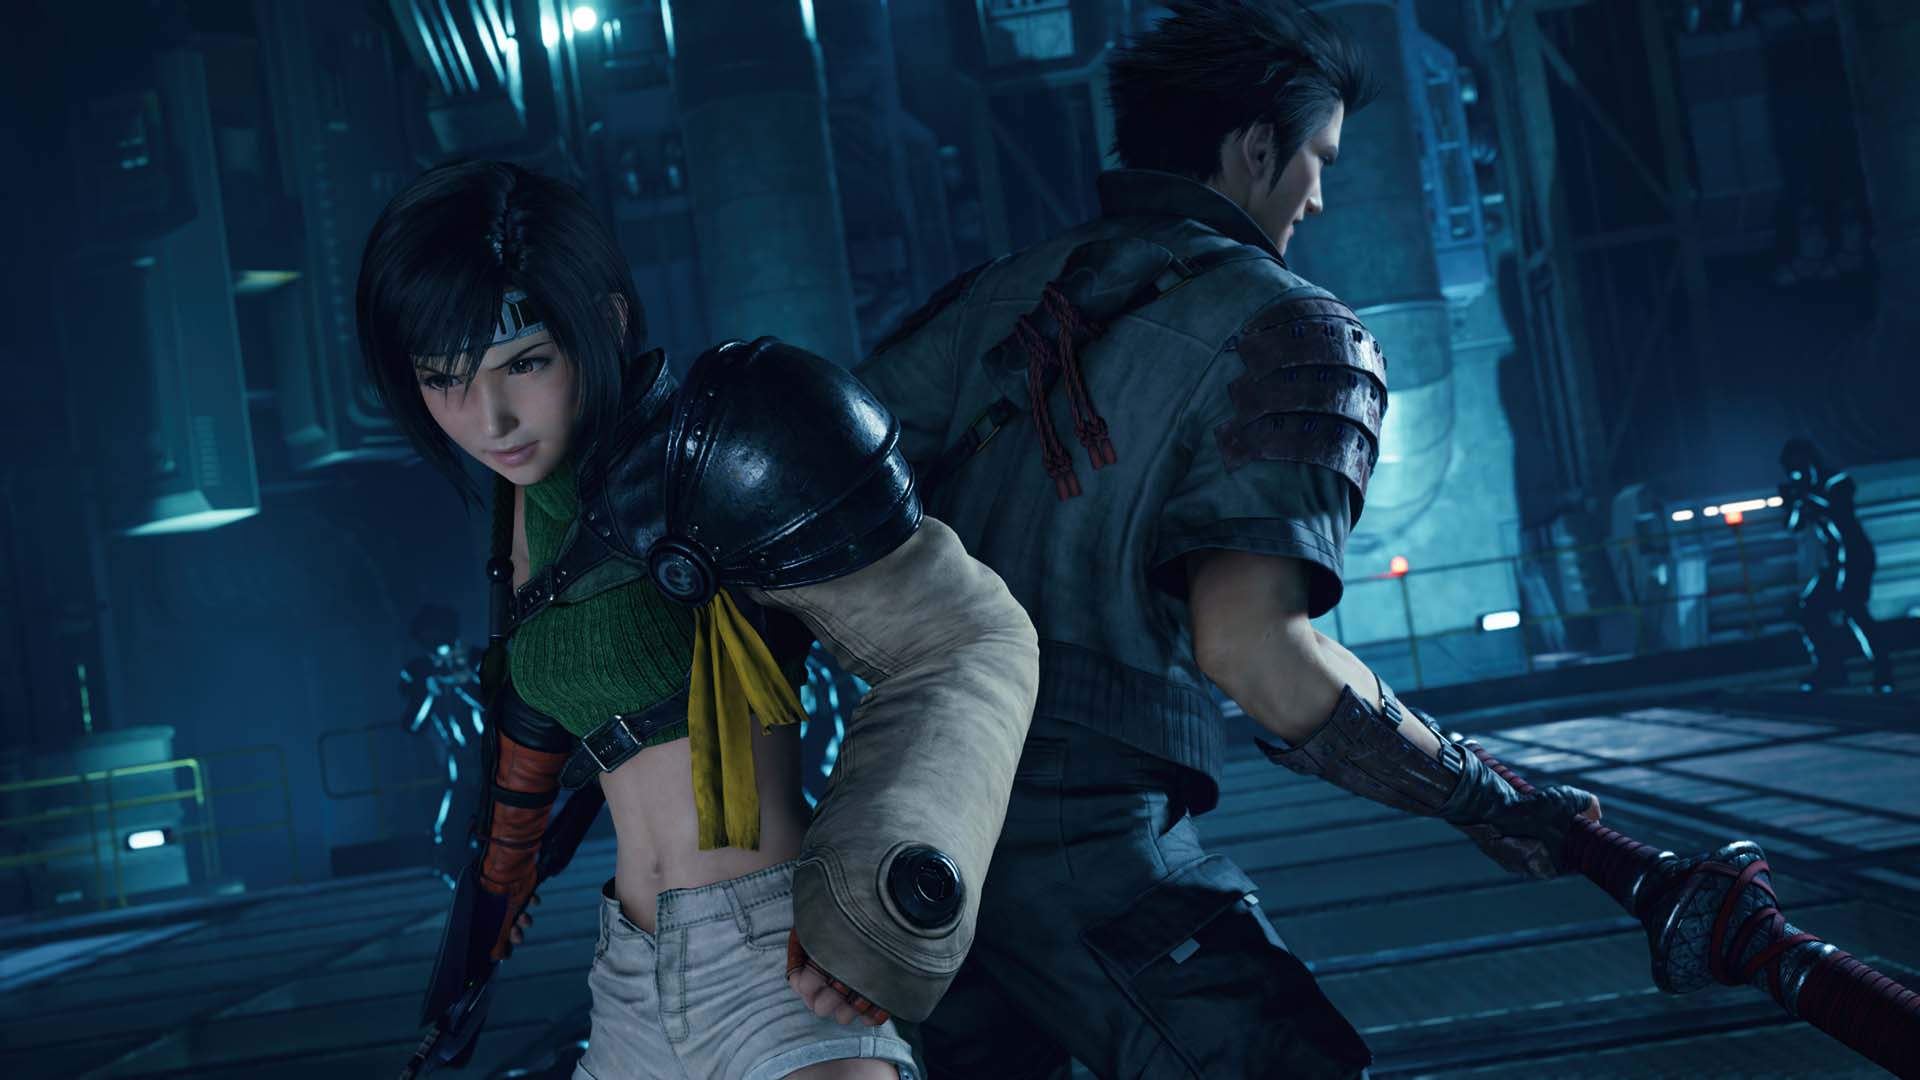 Final Fantasy VII Remake - EPISODE INTERmission (New Story Content Featuring Yuffie) DLC EU PS5 CD Key $11.29